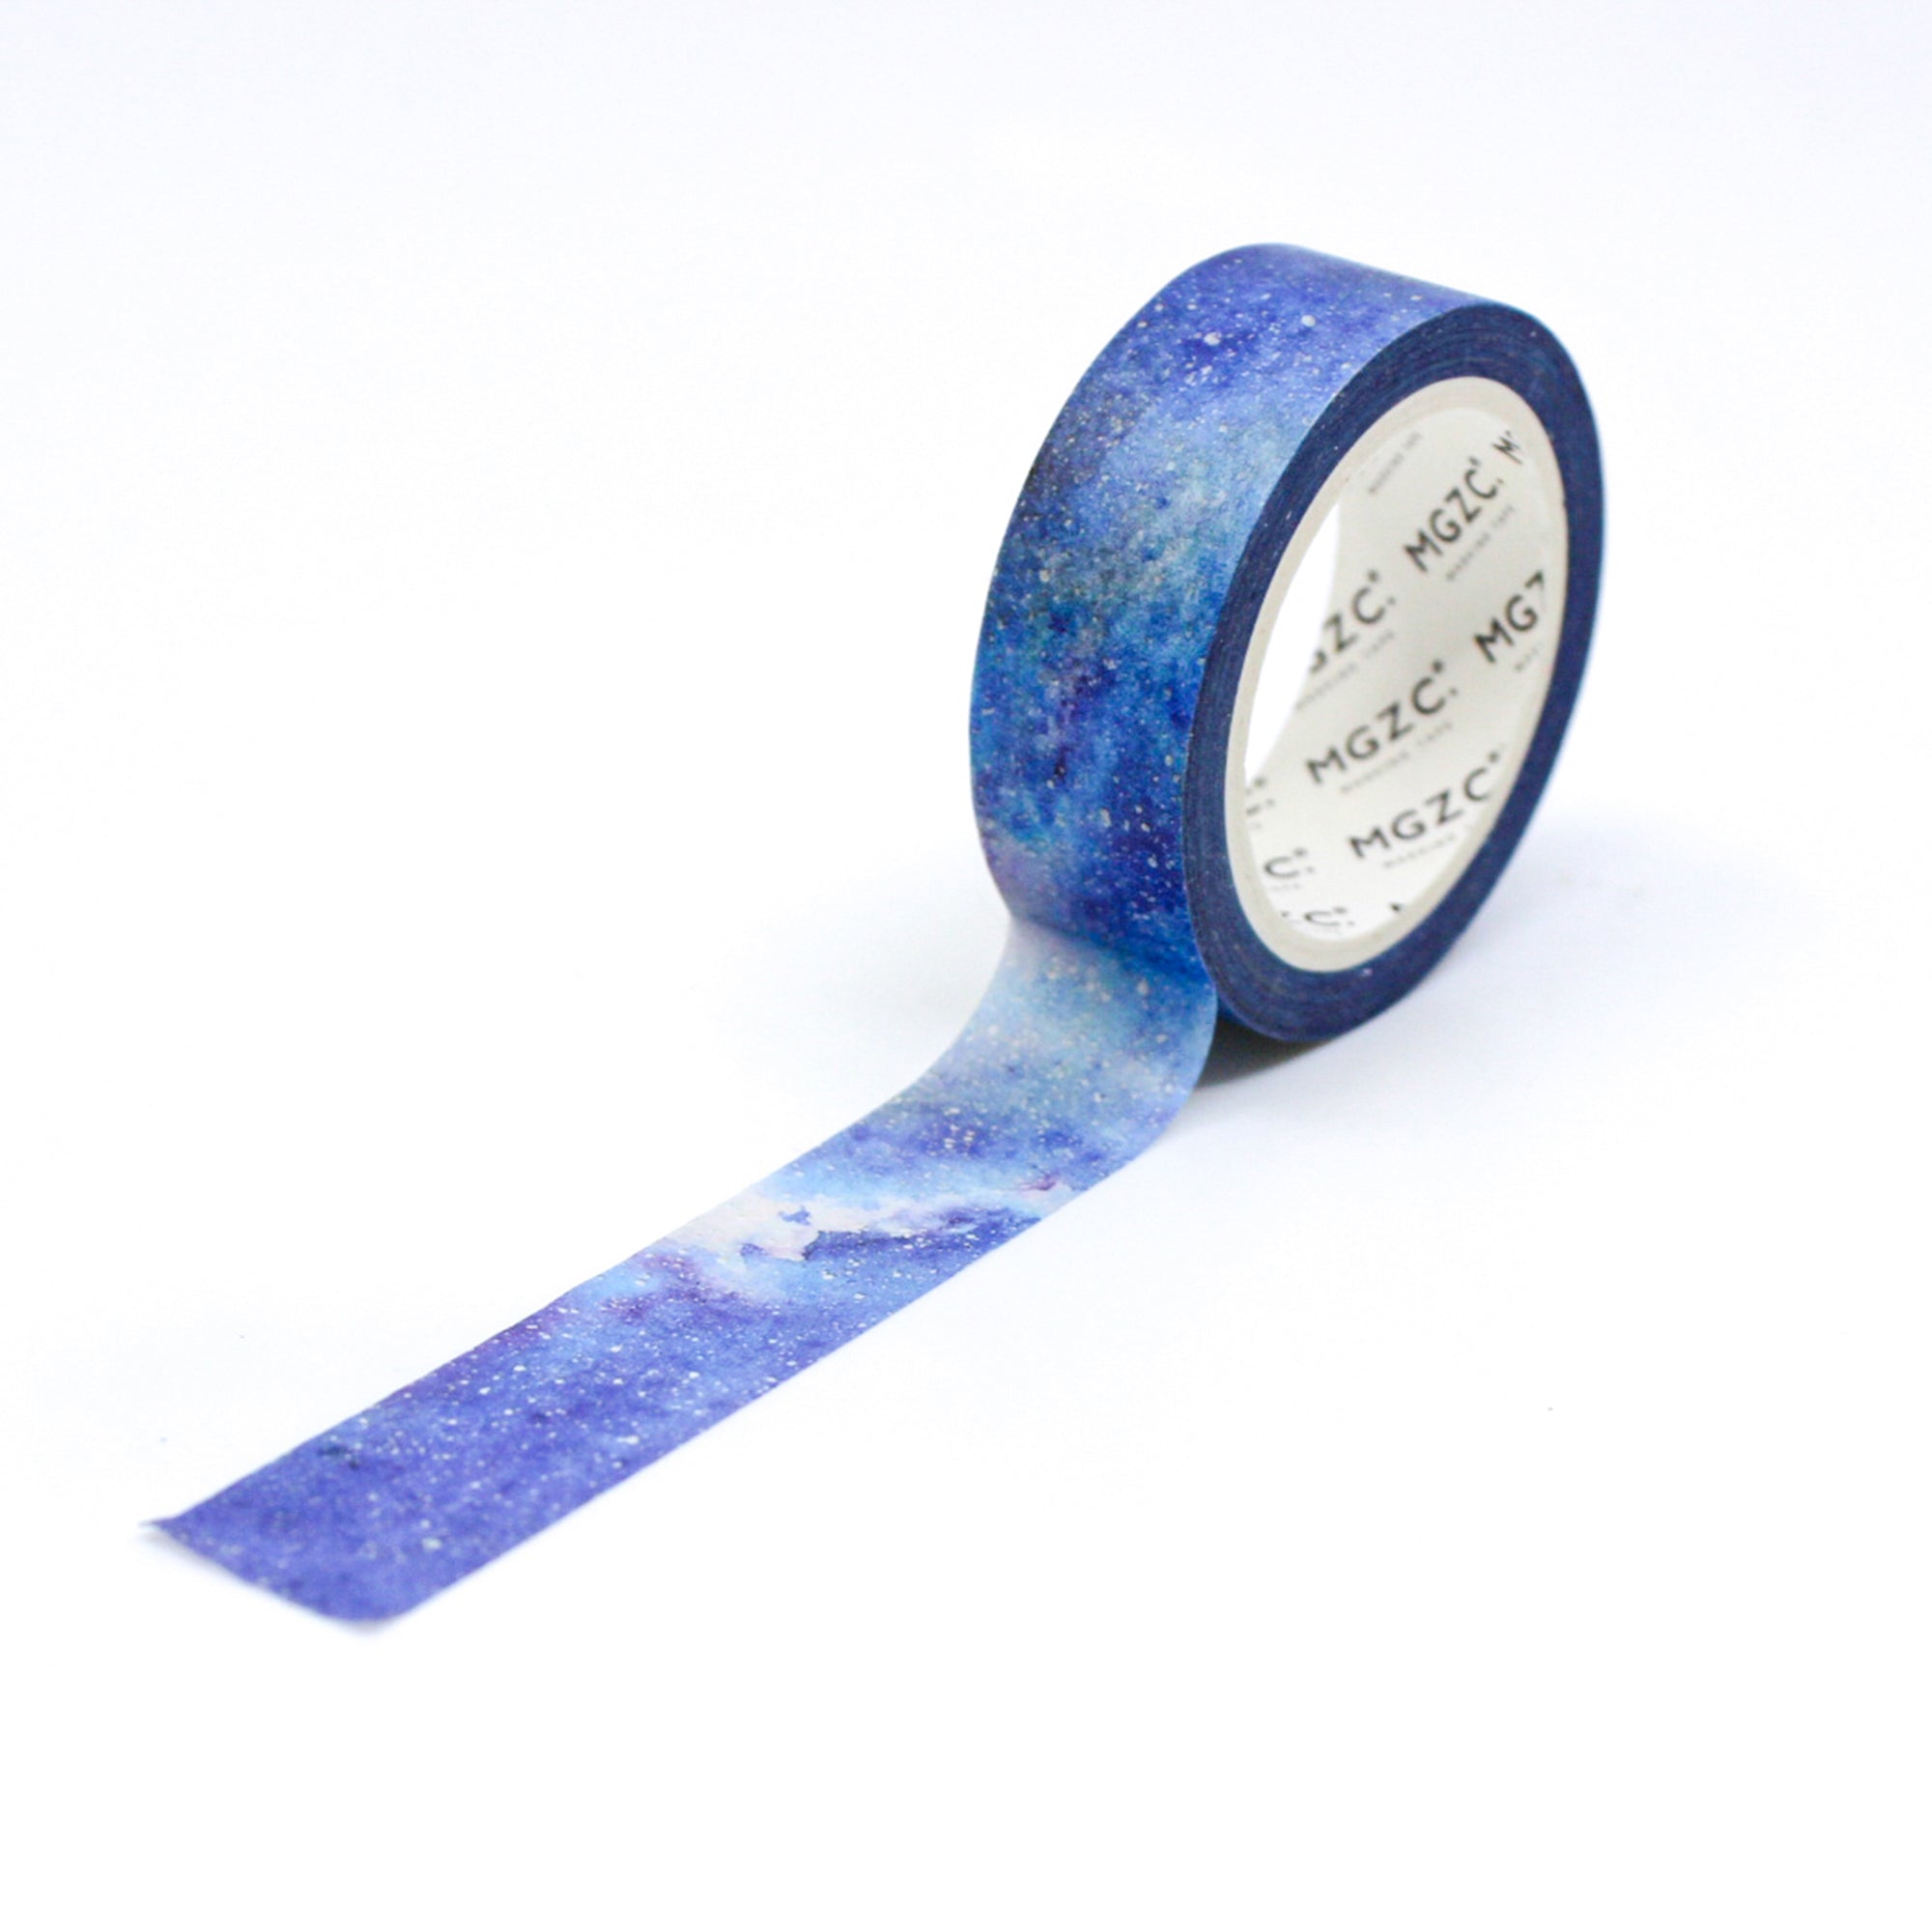 This blue marble watercolor washi tape is the perfect addition to your washi collection. The simplicity of the pattern is perfect for accenting and matching any project's theme while adding a beautiful and interesting pattern. This tape is sold at BBB Supplies Craft Shop.